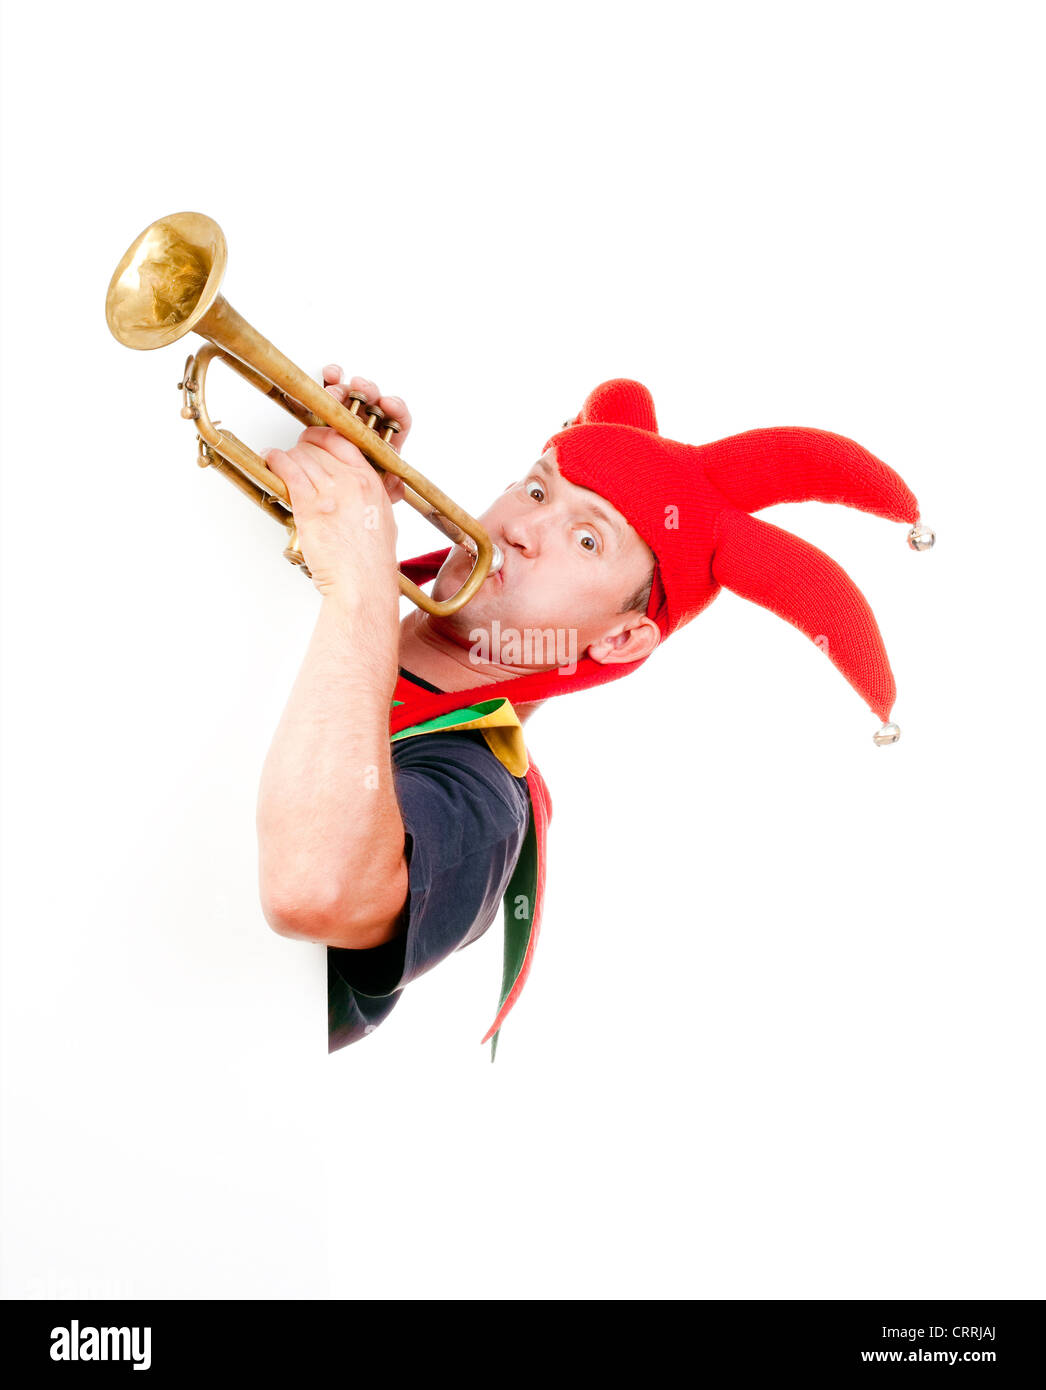 jester - entertaining figure in typical costume blowing trumpet Stock Photo